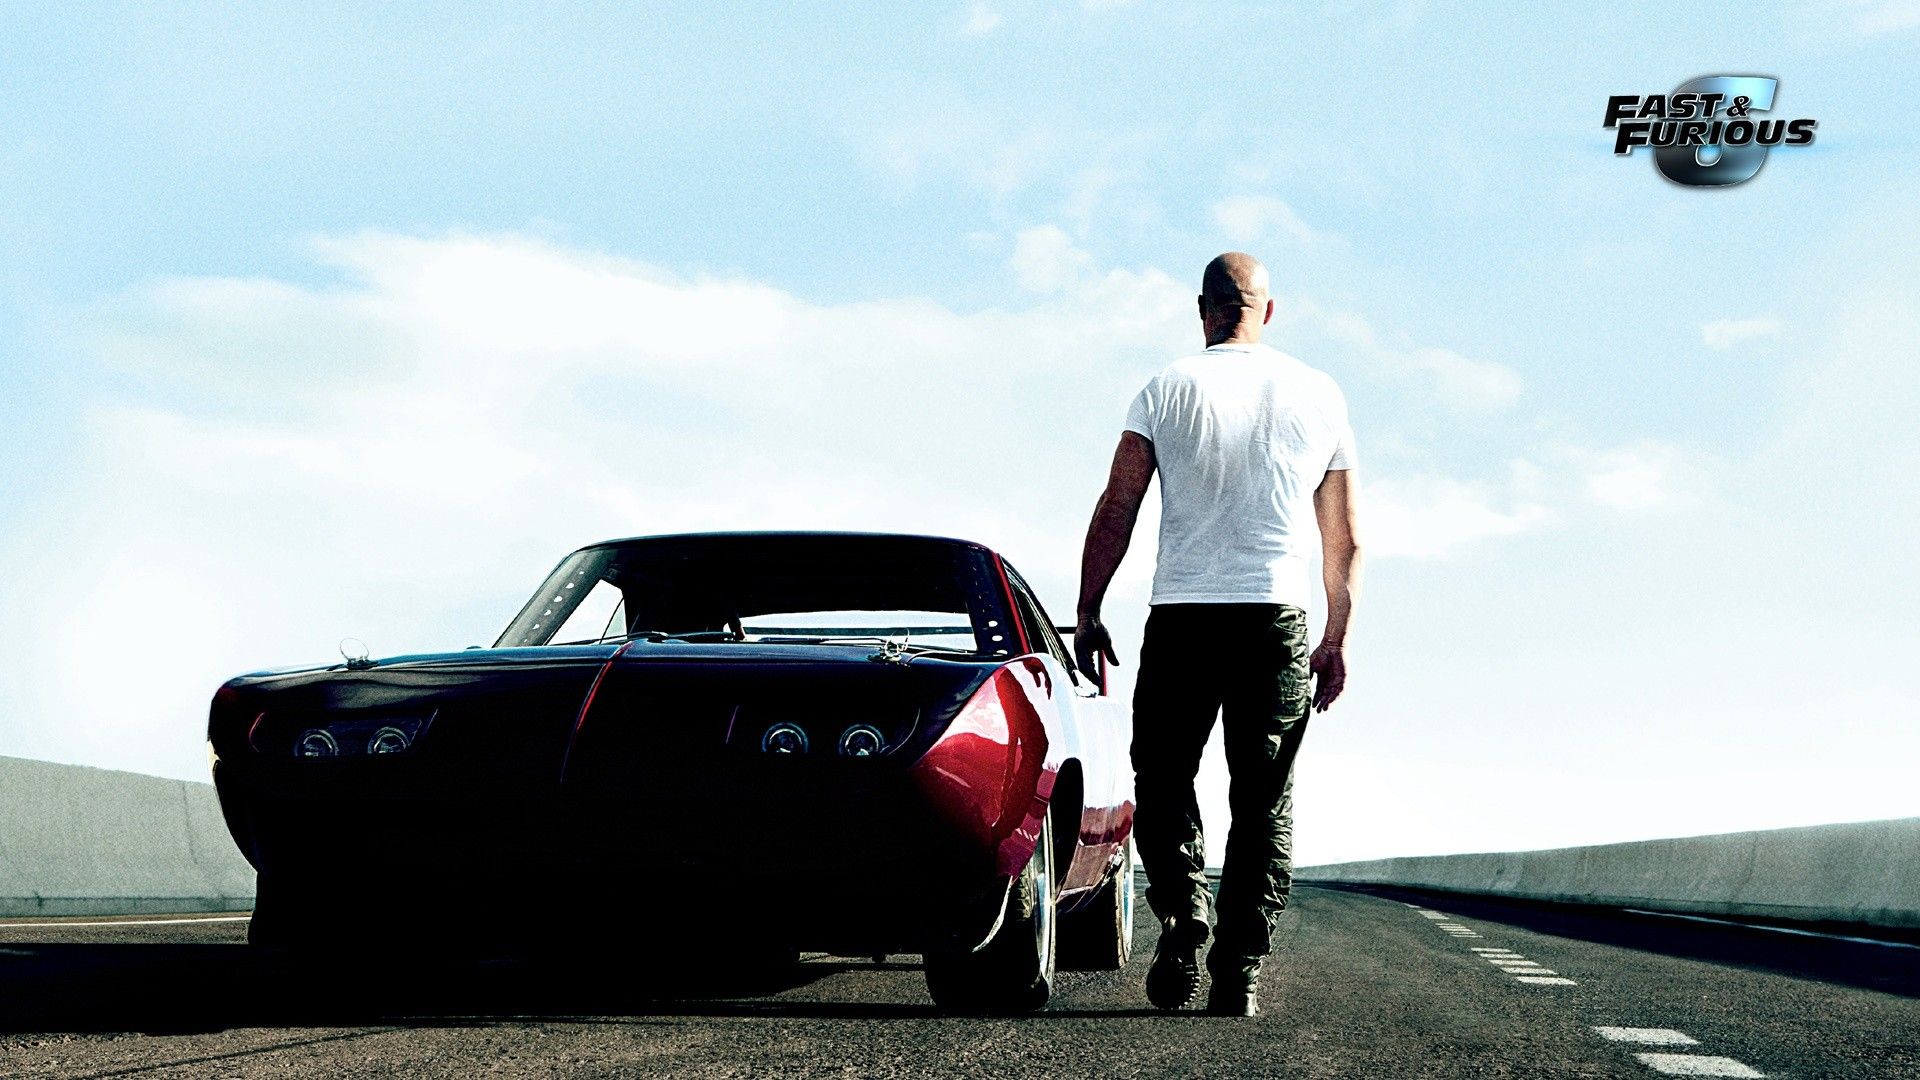 Vin Diesel Classic Car Classic Fast Furious hot rods muscle wallpaperx1080